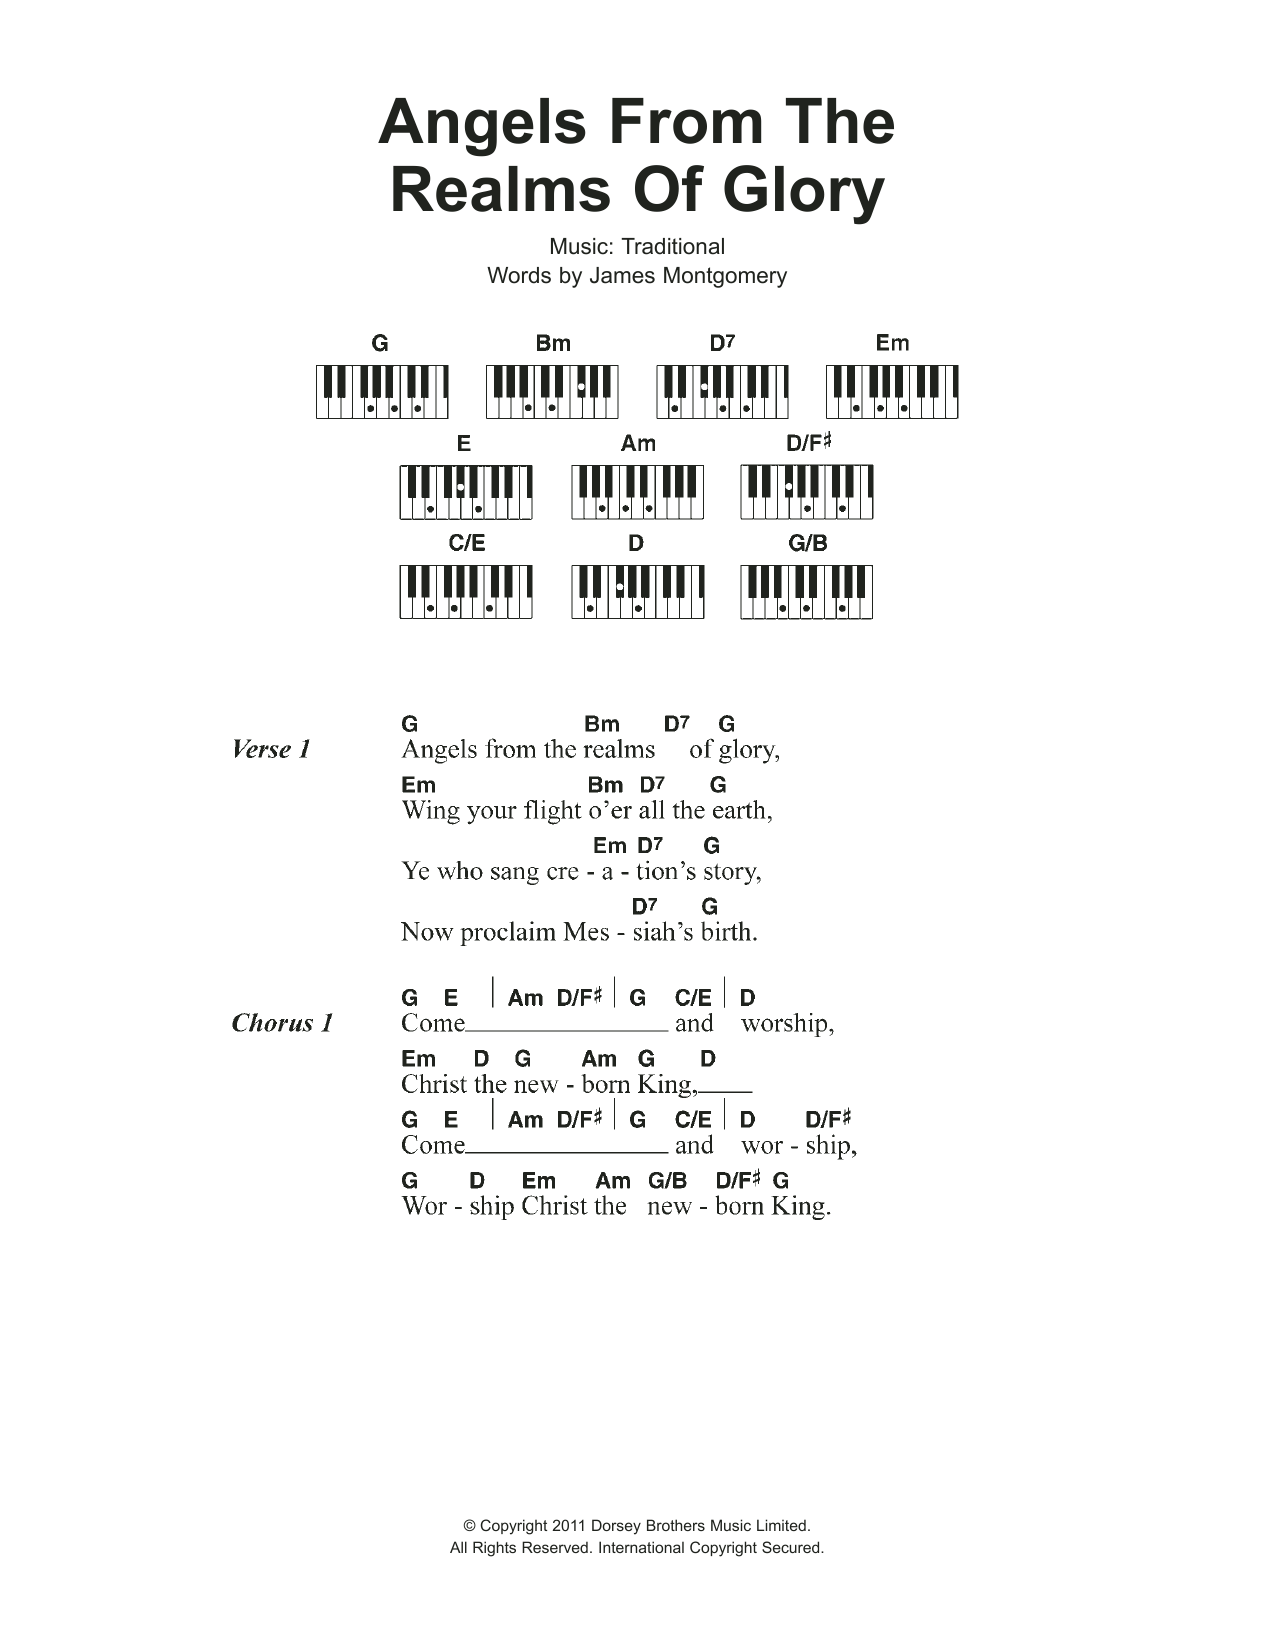 King of glory chords